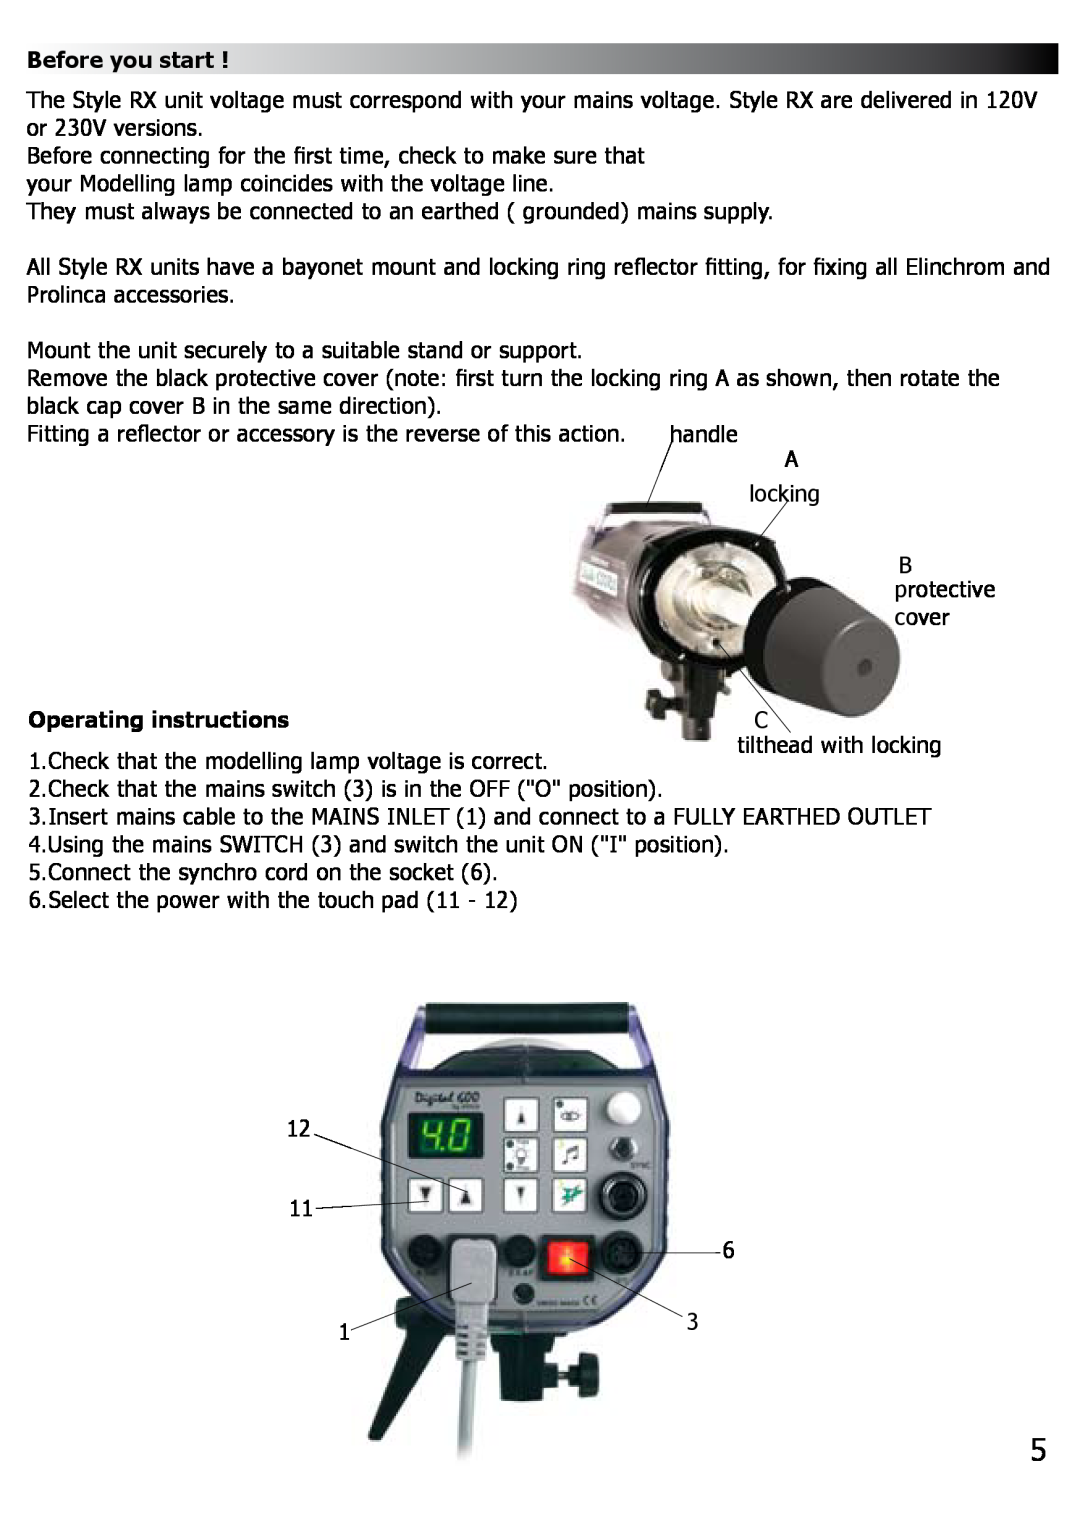 Elinchrom RX 1200, RX 600, RX 300 manual Before you start, Operating instructions 